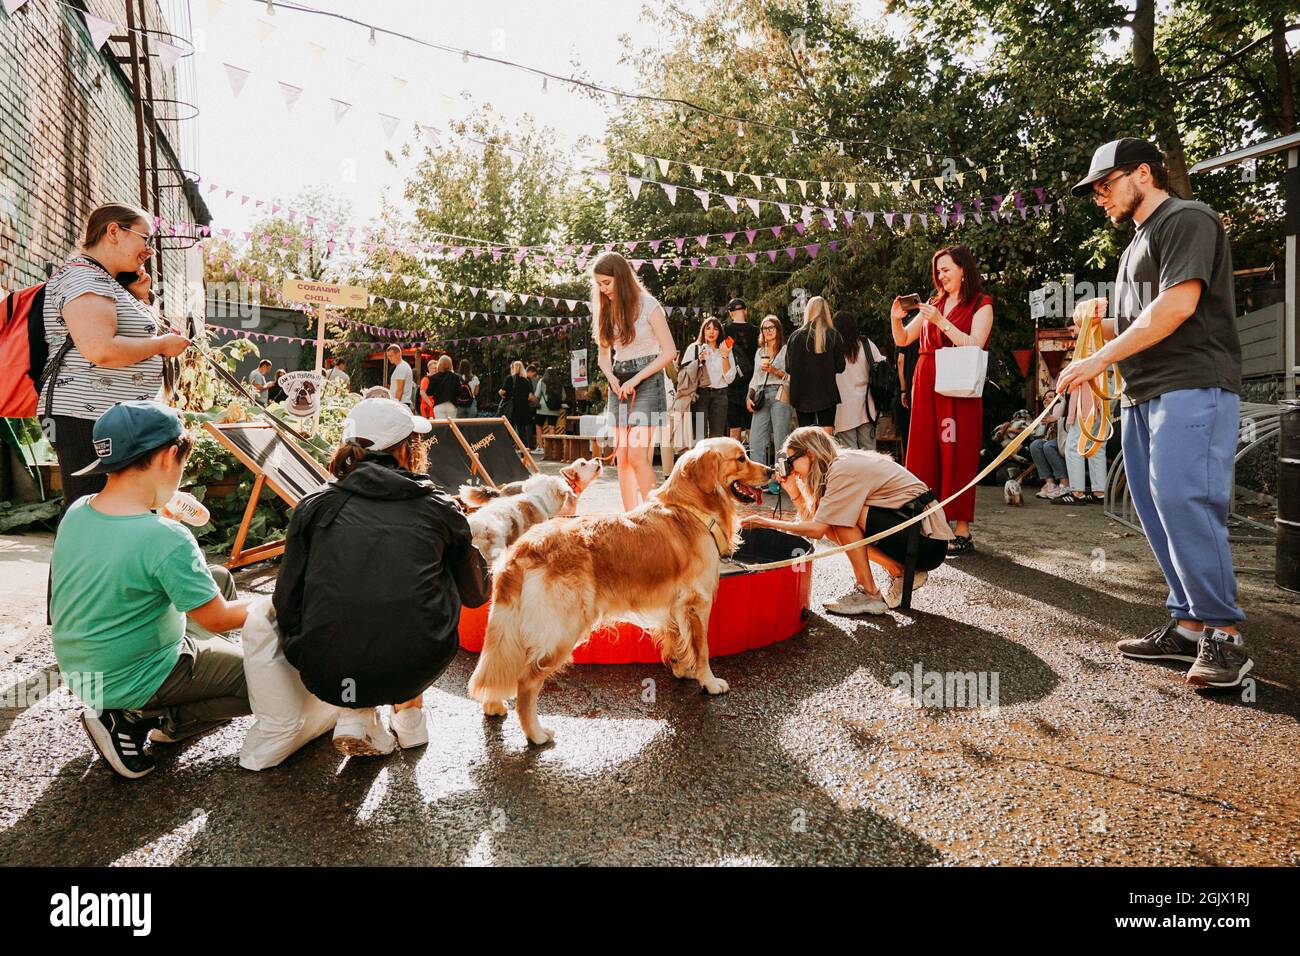 September 11, 2021 Minsk, Belarus - Golden retriever. Pet festival in the city park on a bright day. Dog show. Holiday Stock Photo - Alamy